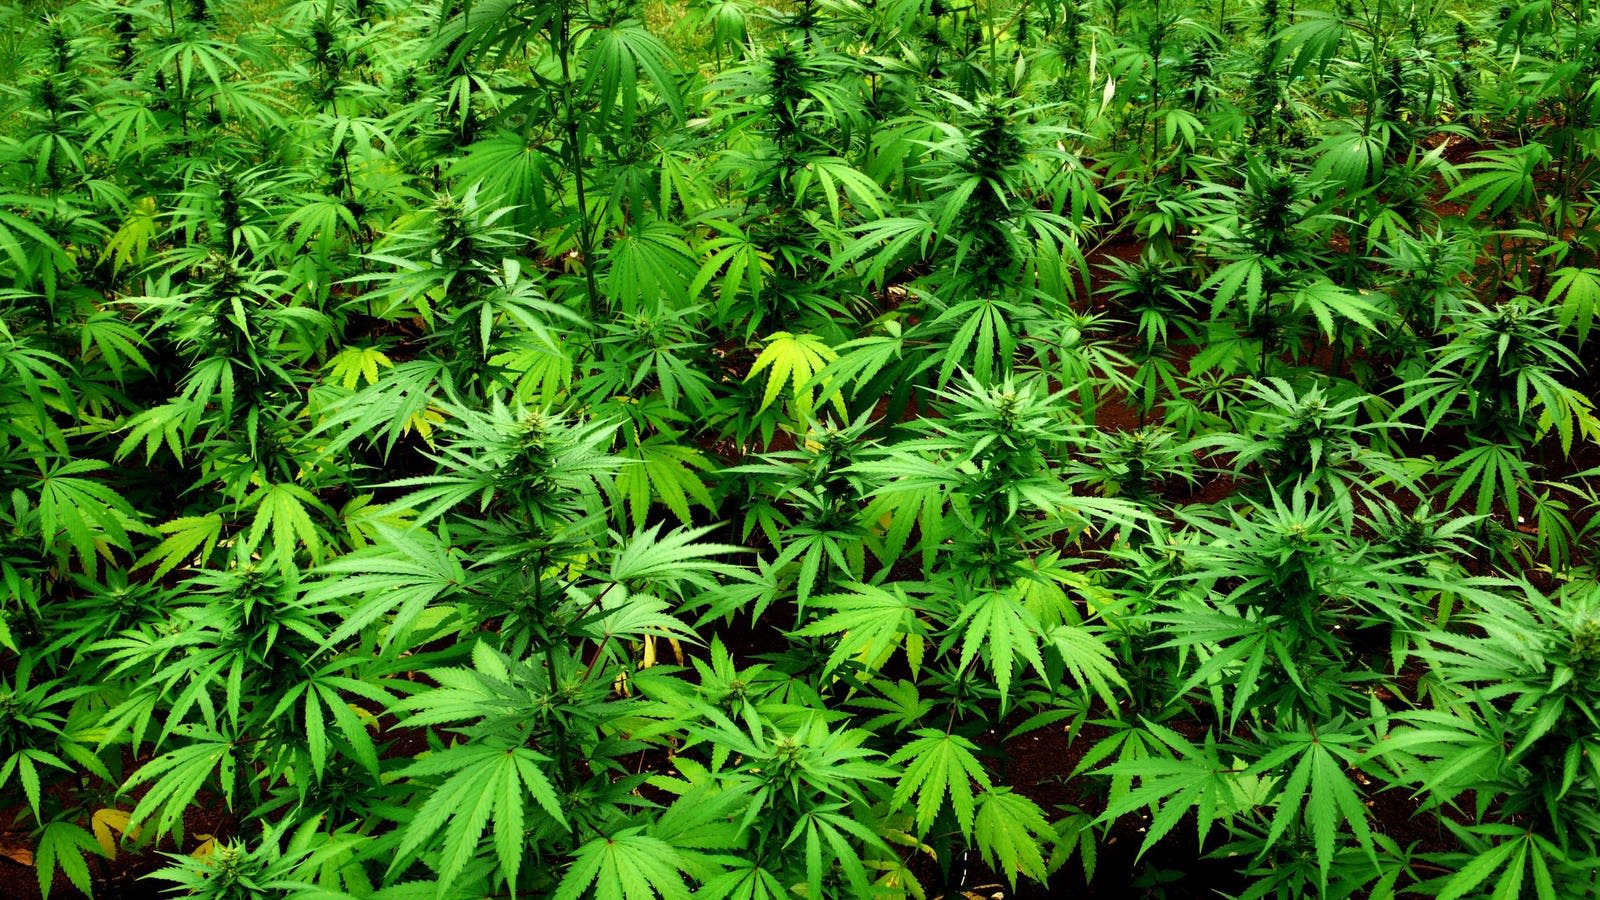 The U.S. Federal Government Plans To Reclassify Marijuana From A Schedule I To Schedule III Drug. Here Are The...